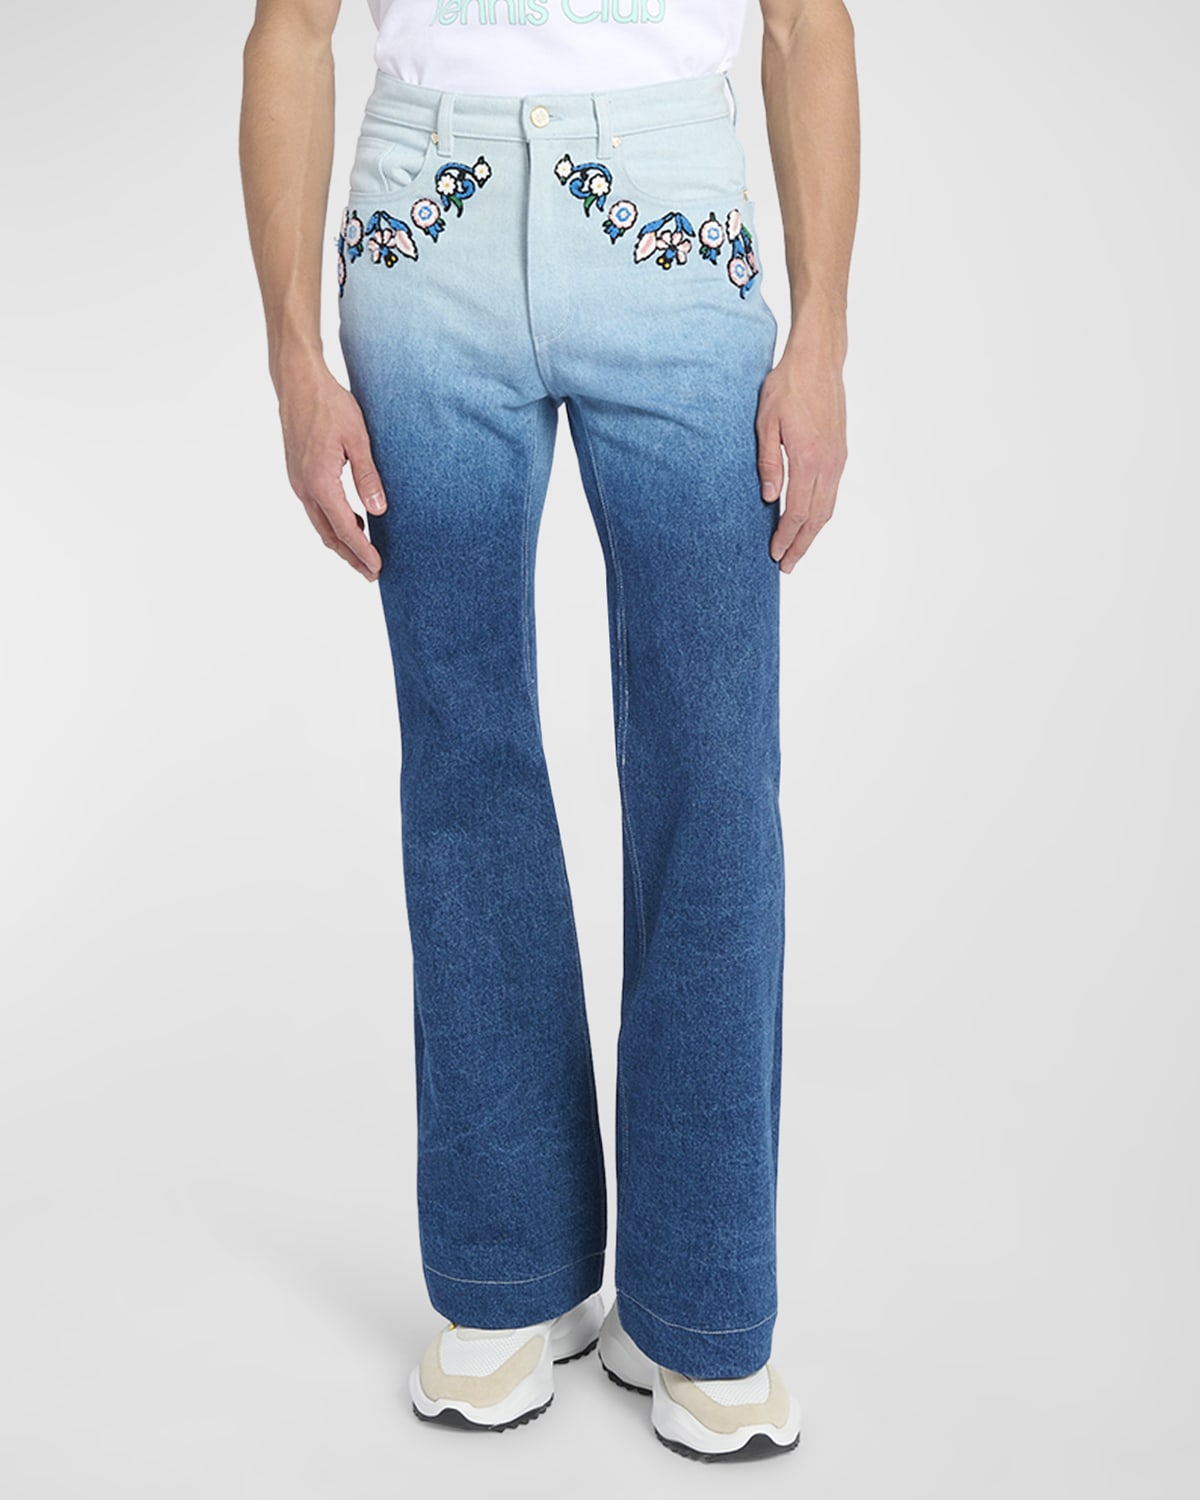 CASABLANCA MEN'S FLORAL EMBROIDERED FLARED GRADIENT JEANS